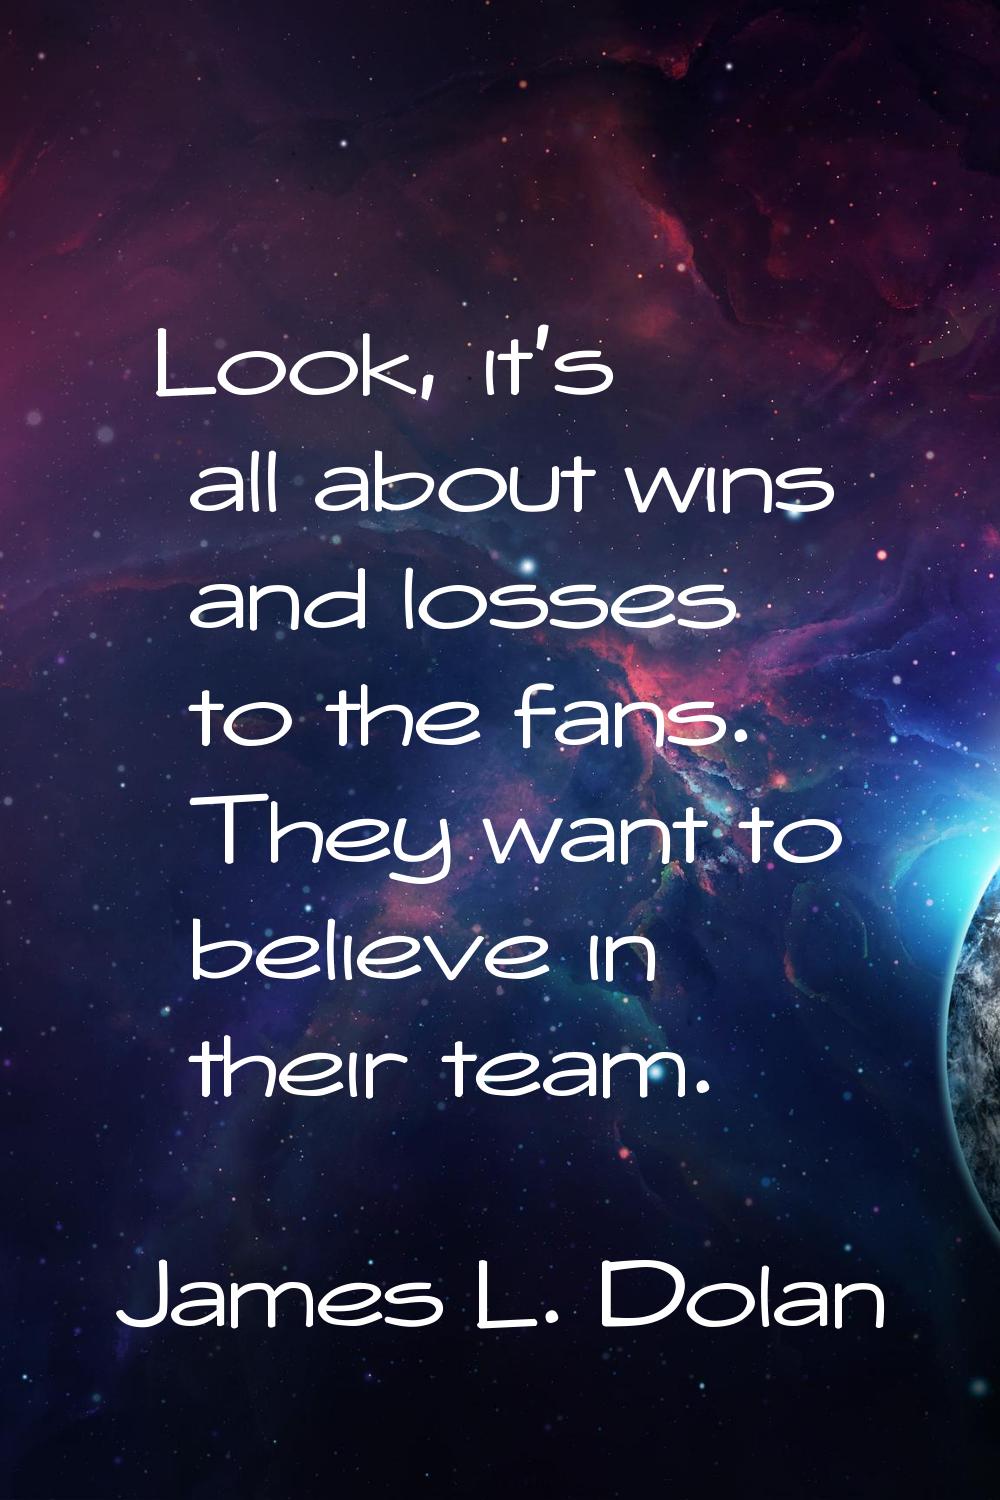 Look, it's all about wins and losses to the fans. They want to believe in their team.